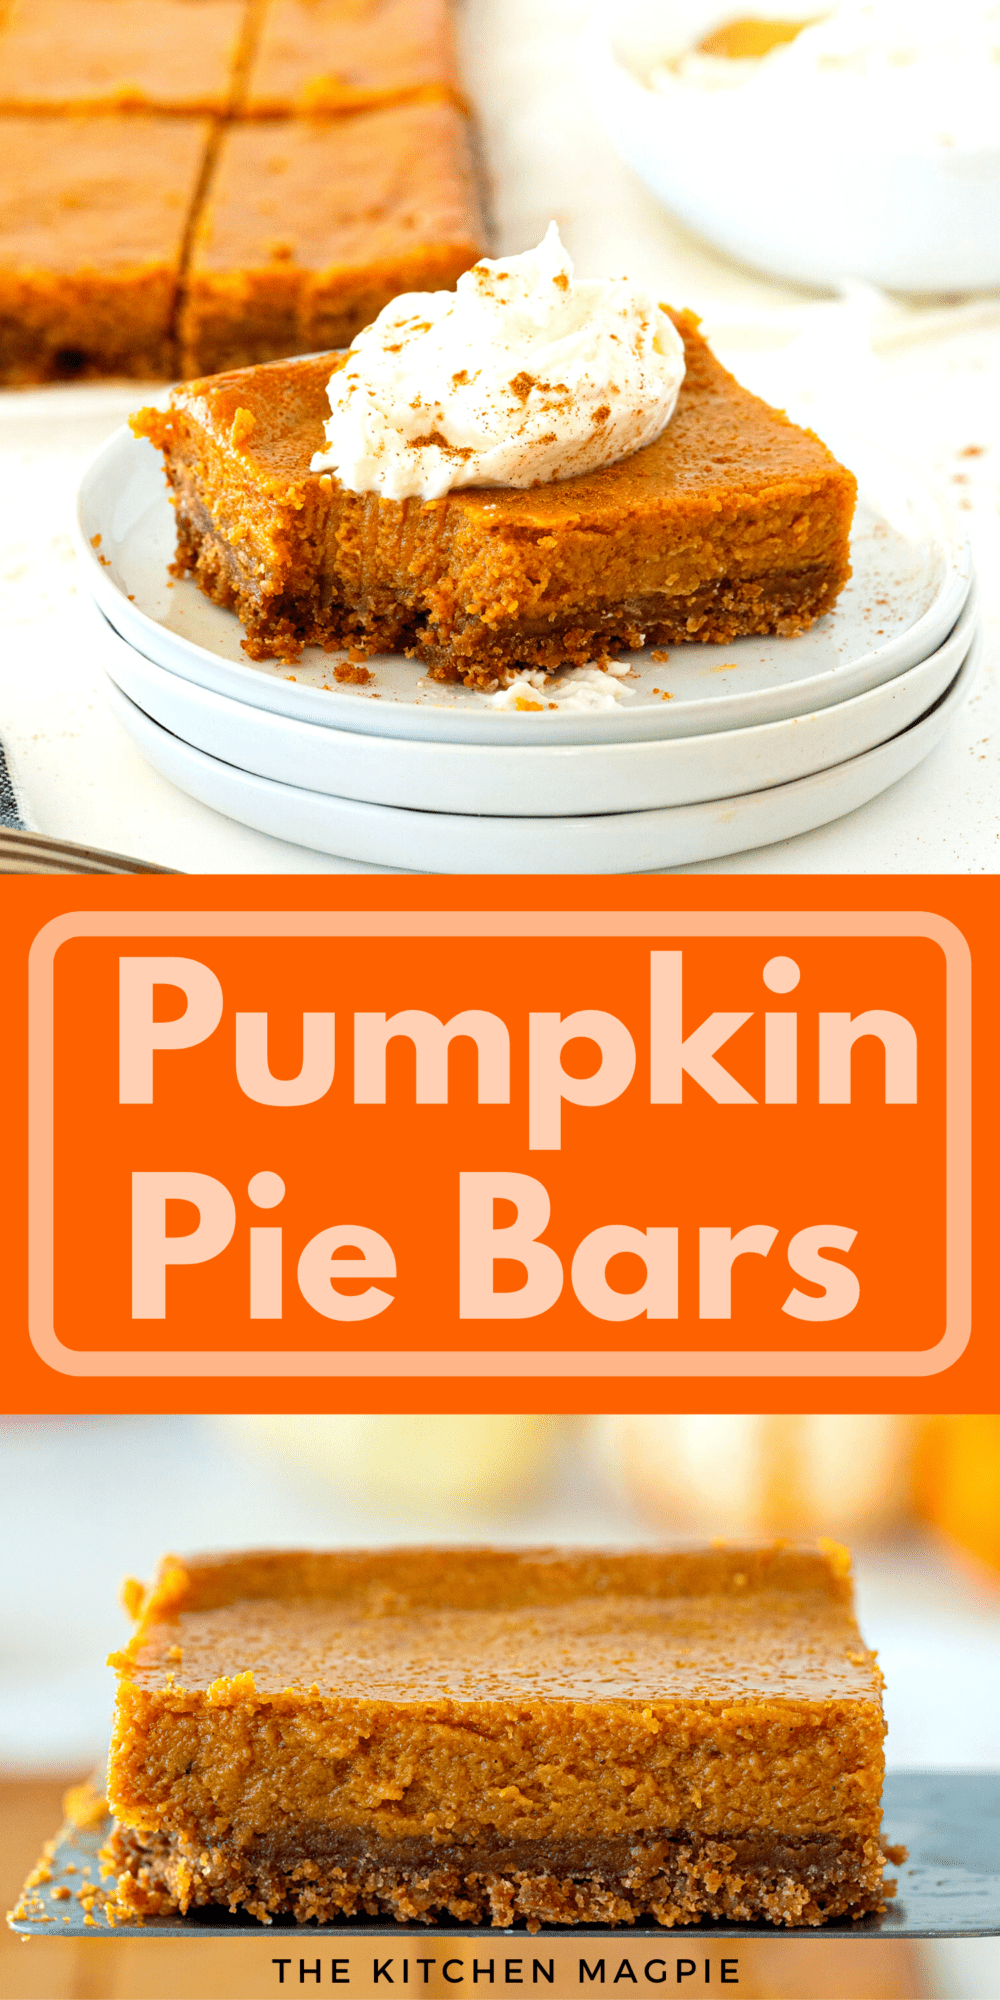 These pumpkin pie bars are the perfect way to feed a crowd pumpkin pie! A graham cracker crust is topped with pumpkin pie filling and sliced into 12 bars!